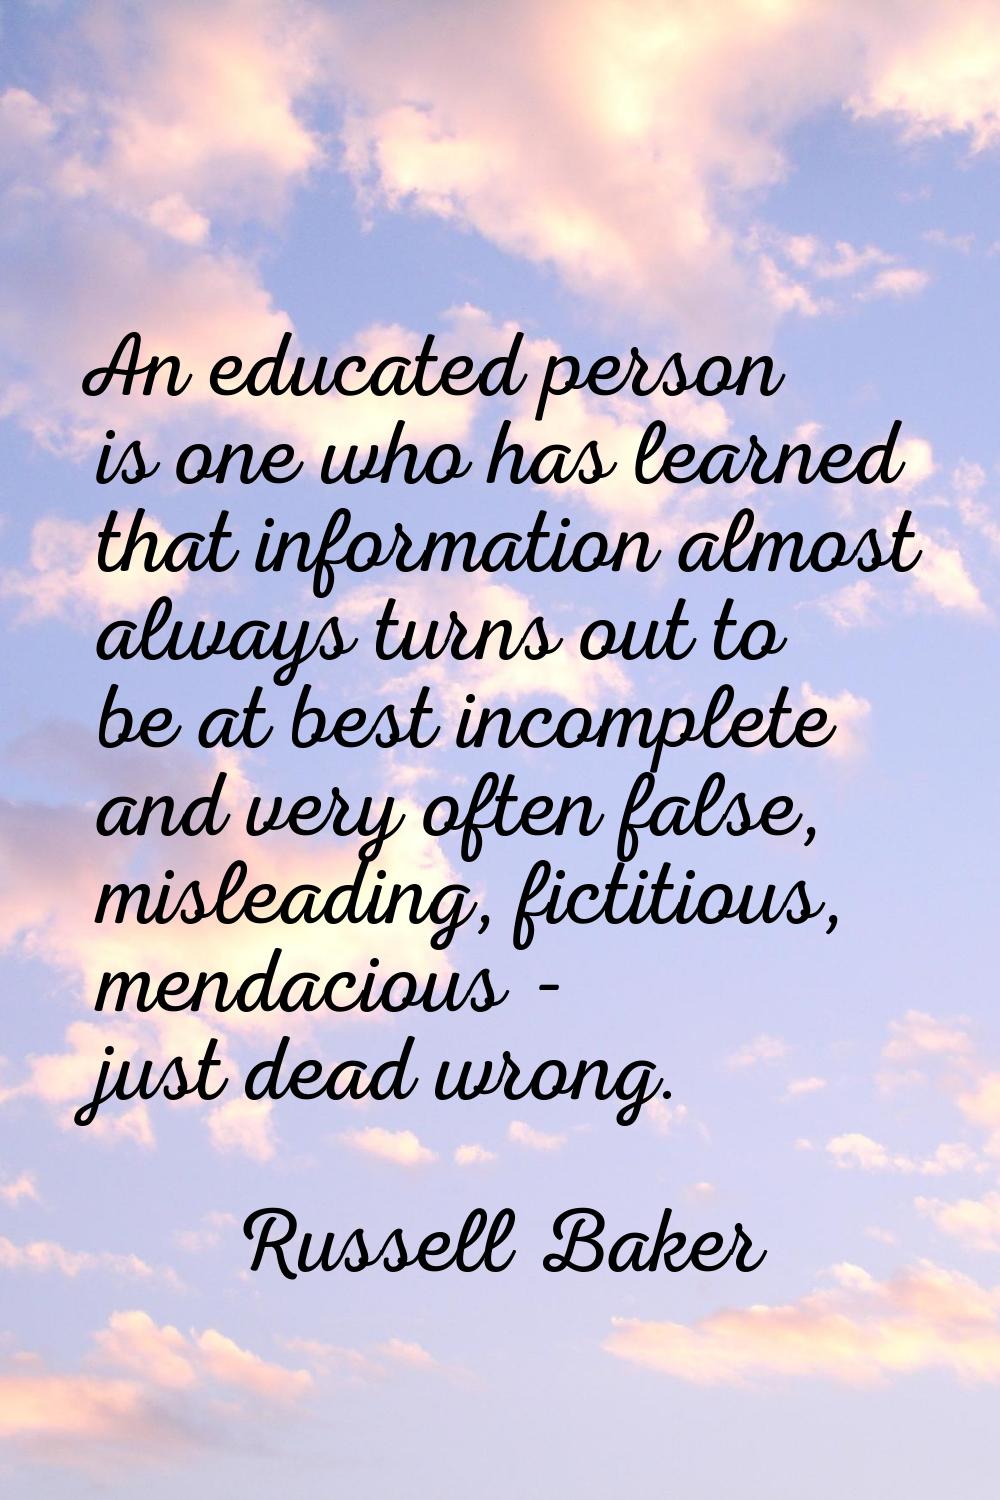 An educated person is one who has learned that information almost always turns out to be at best in